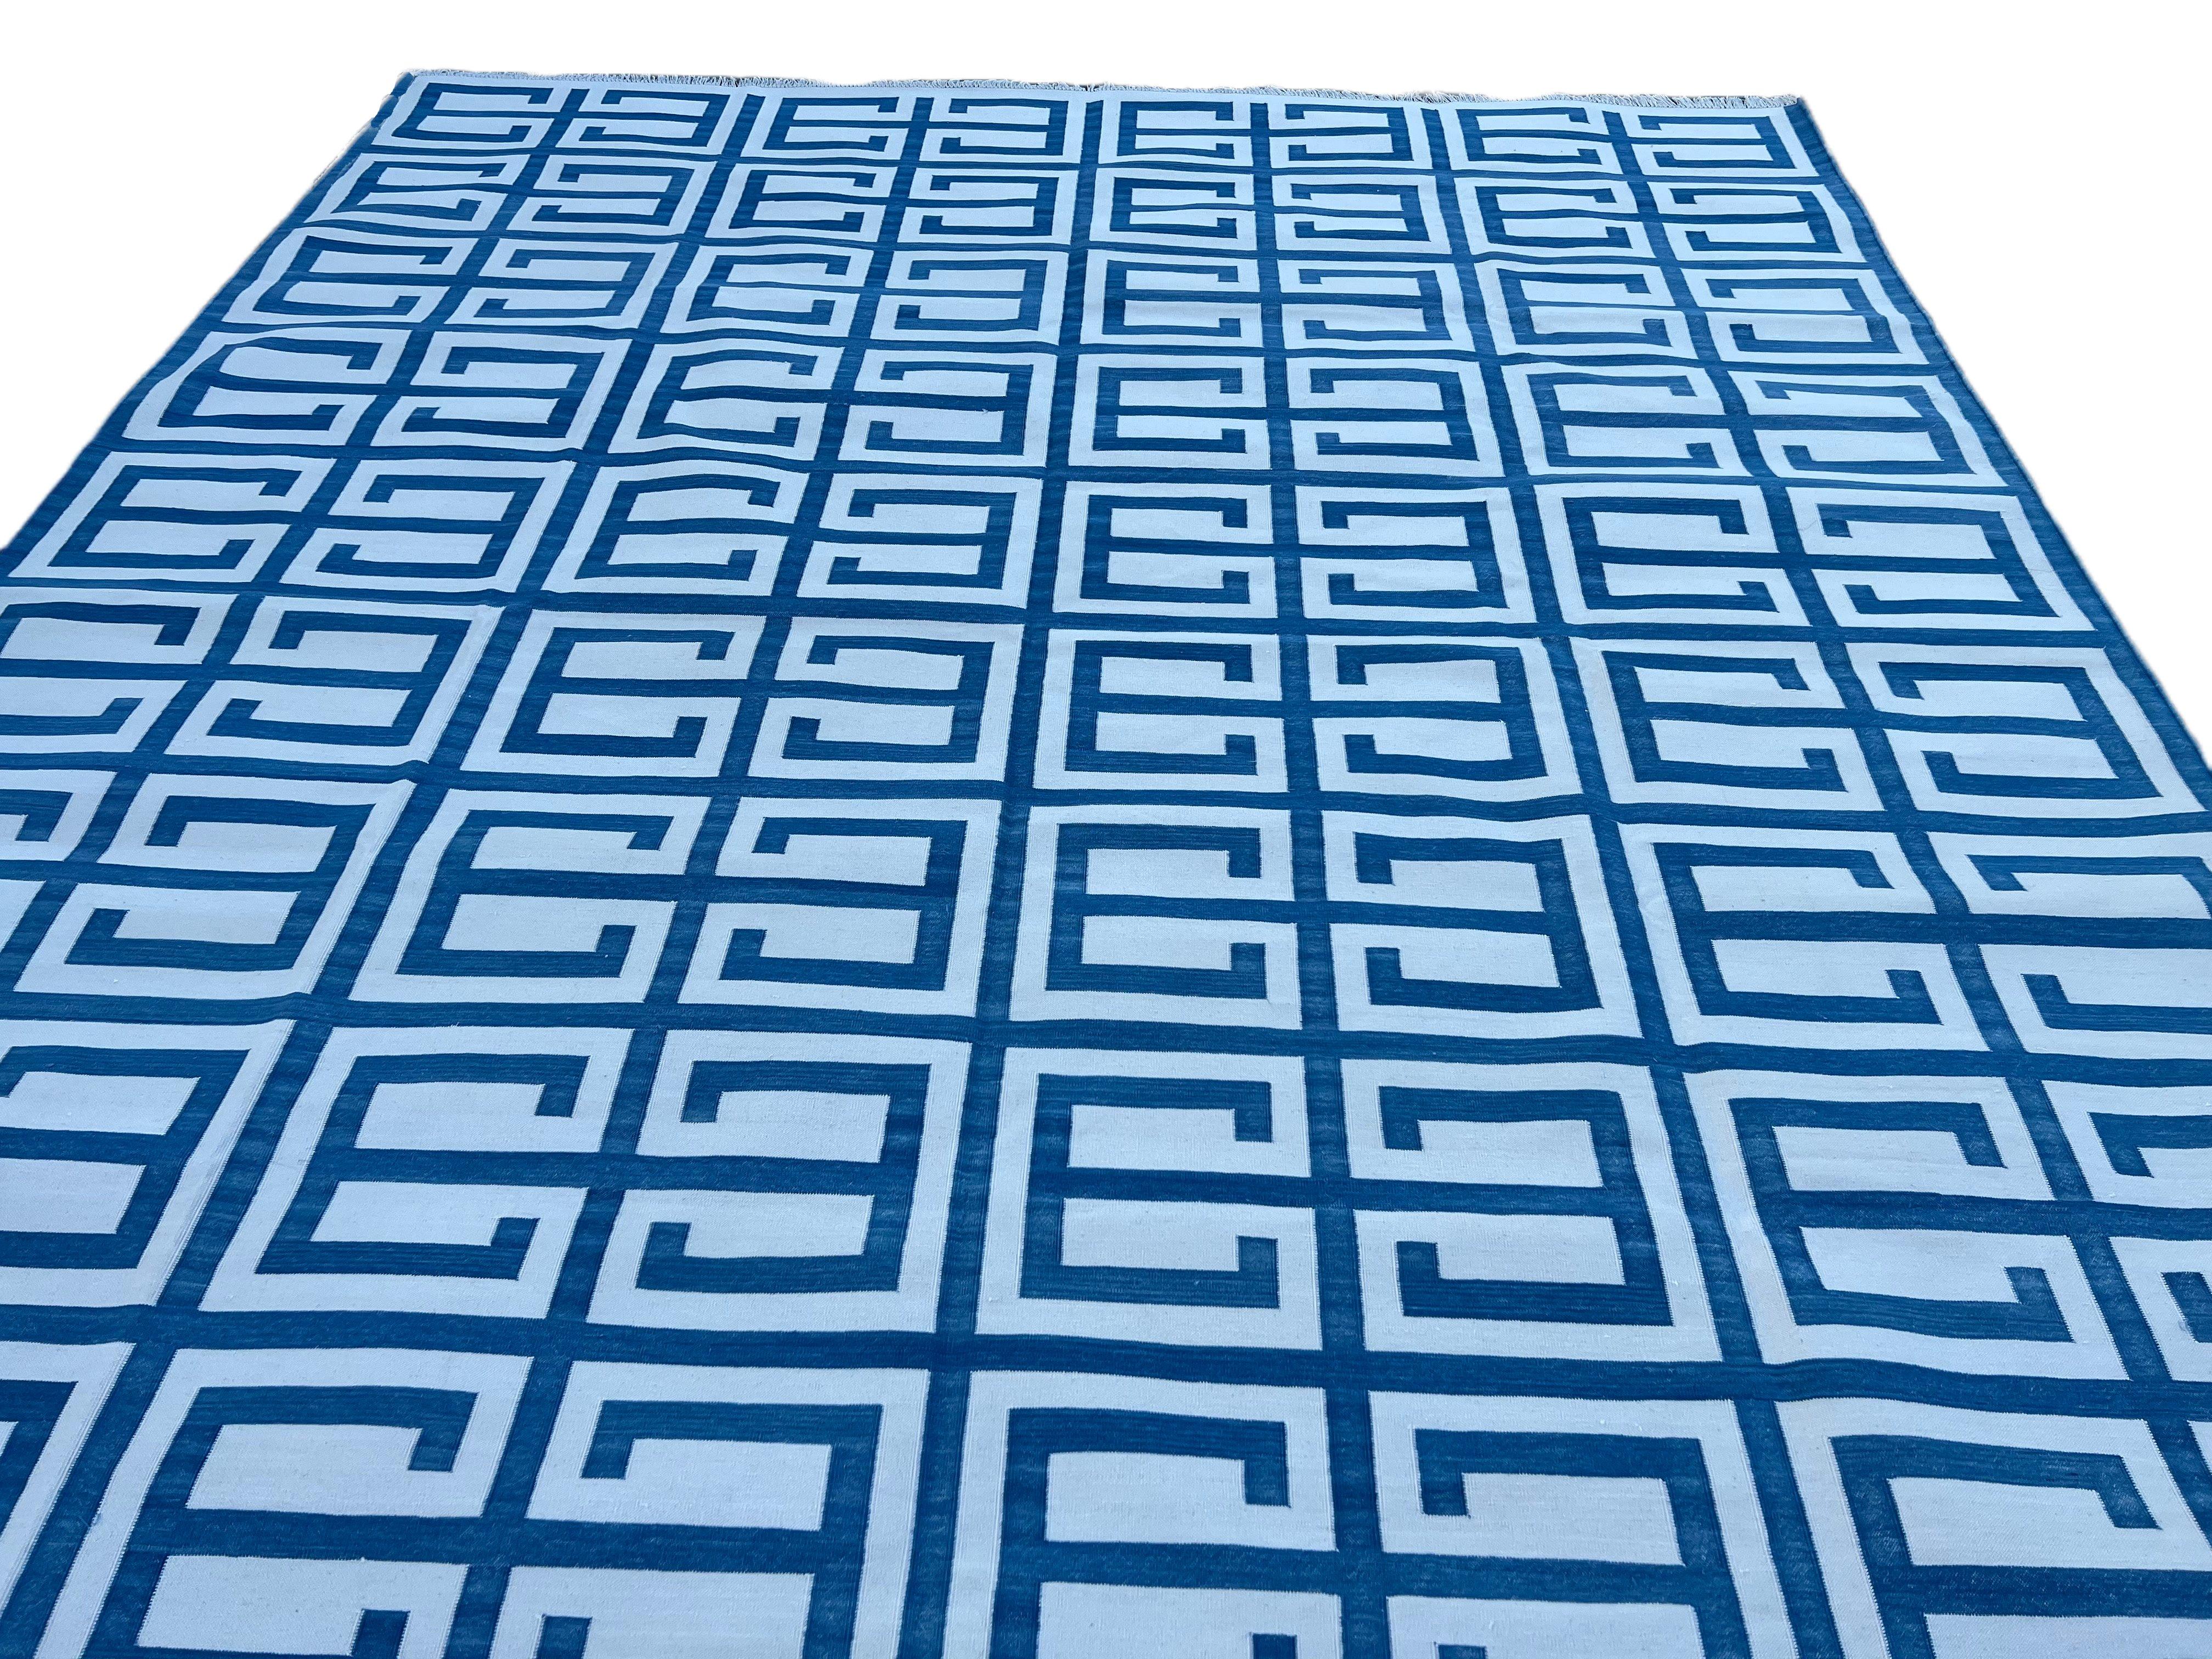 Handmade Cotton Area Flat Weave Rug, Blue And White Geometric Indian Dhurrie Rug For Sale 1